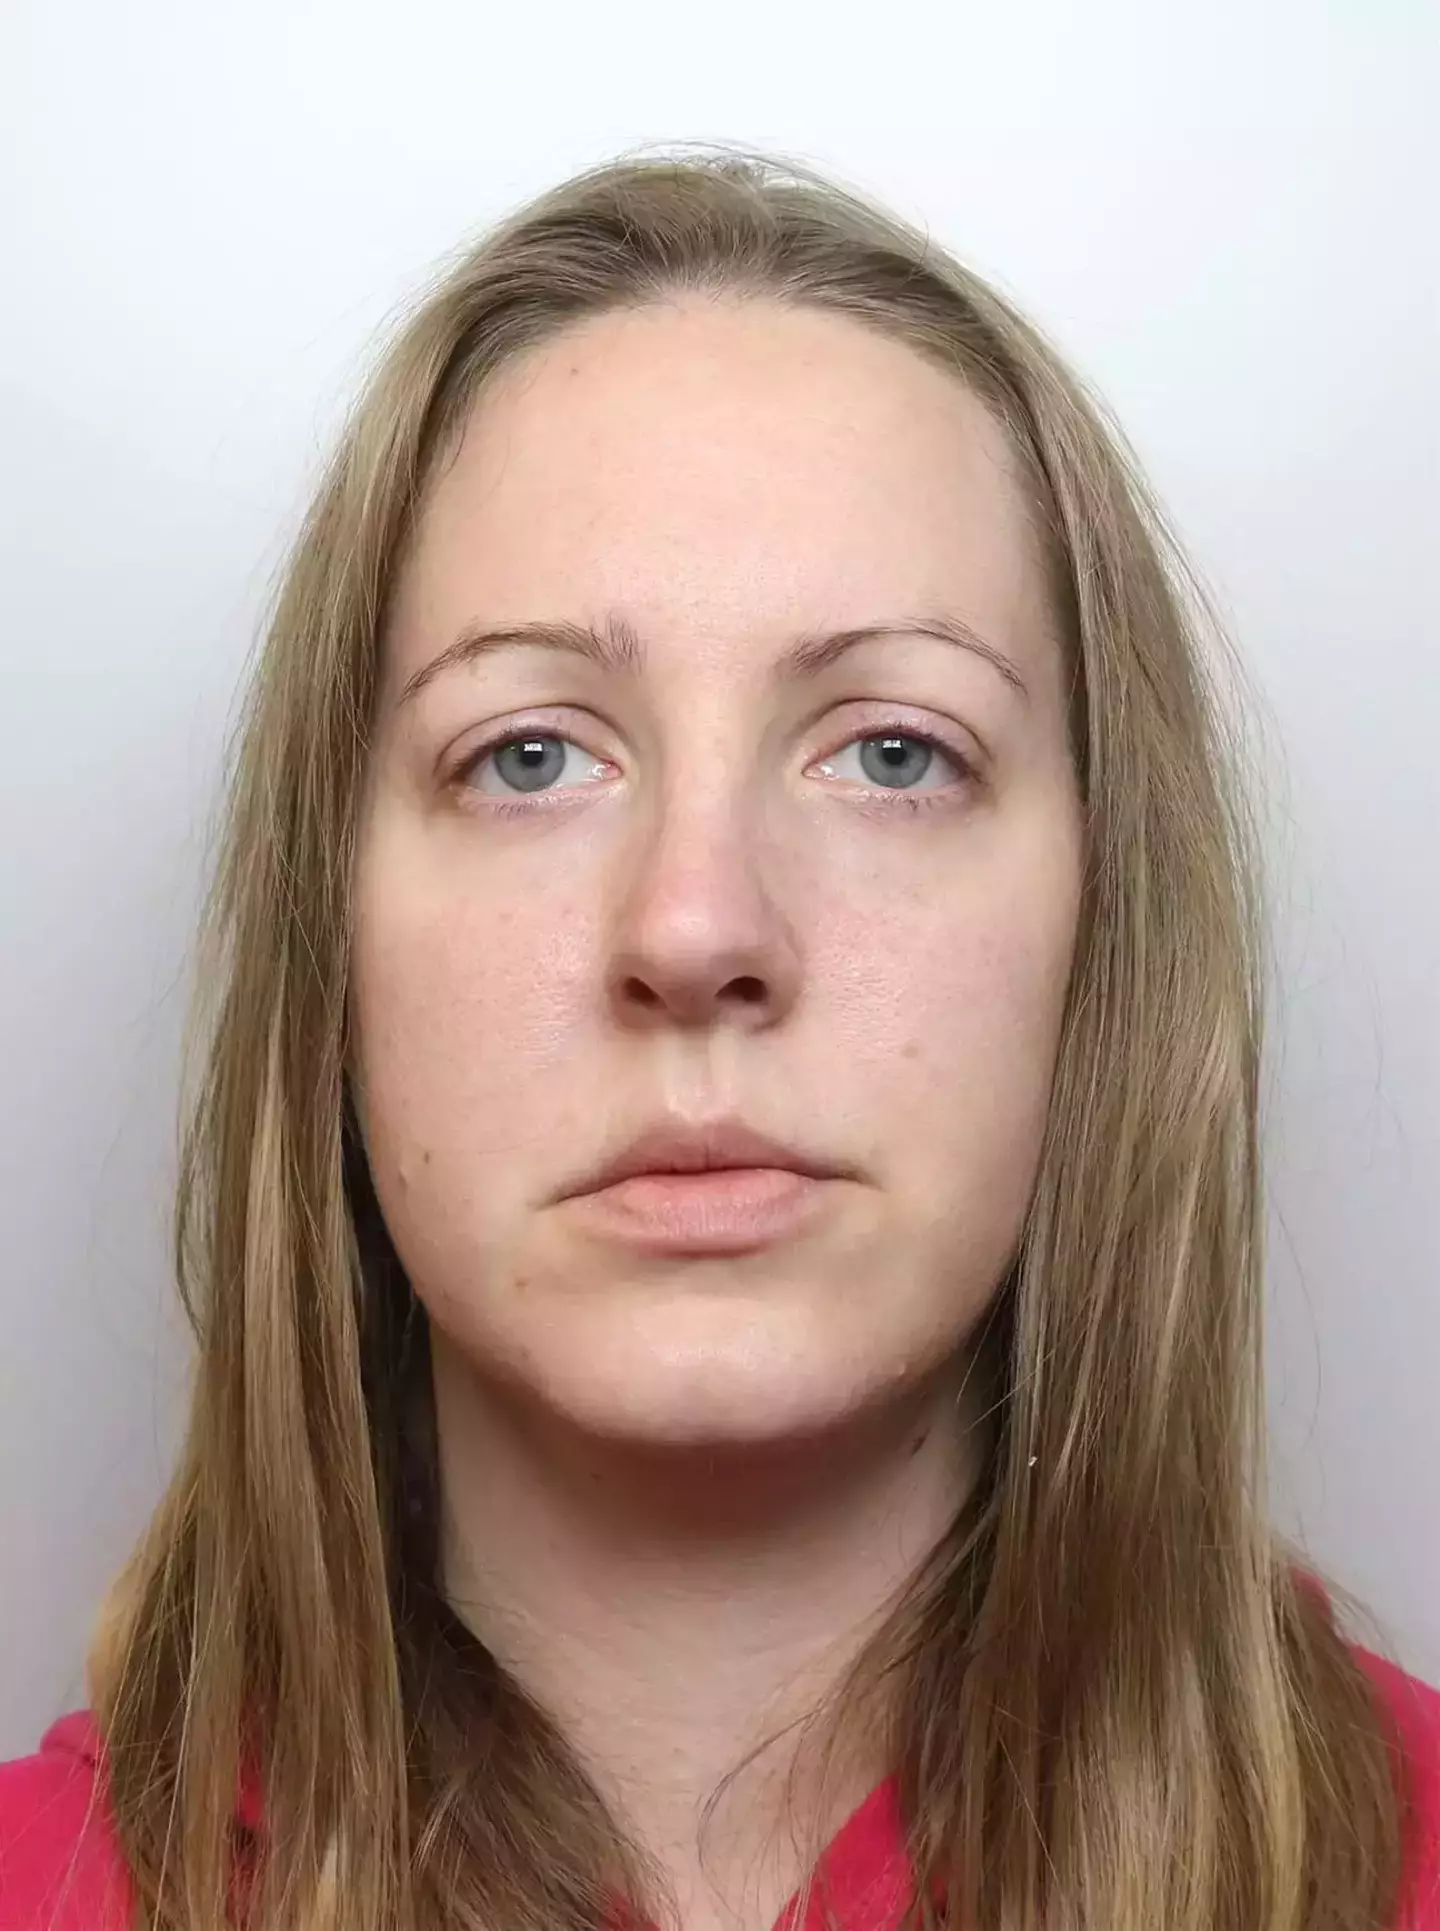 Lucy Letby was found guilty of seven counts of murder and six counts of attempted murder of babies.